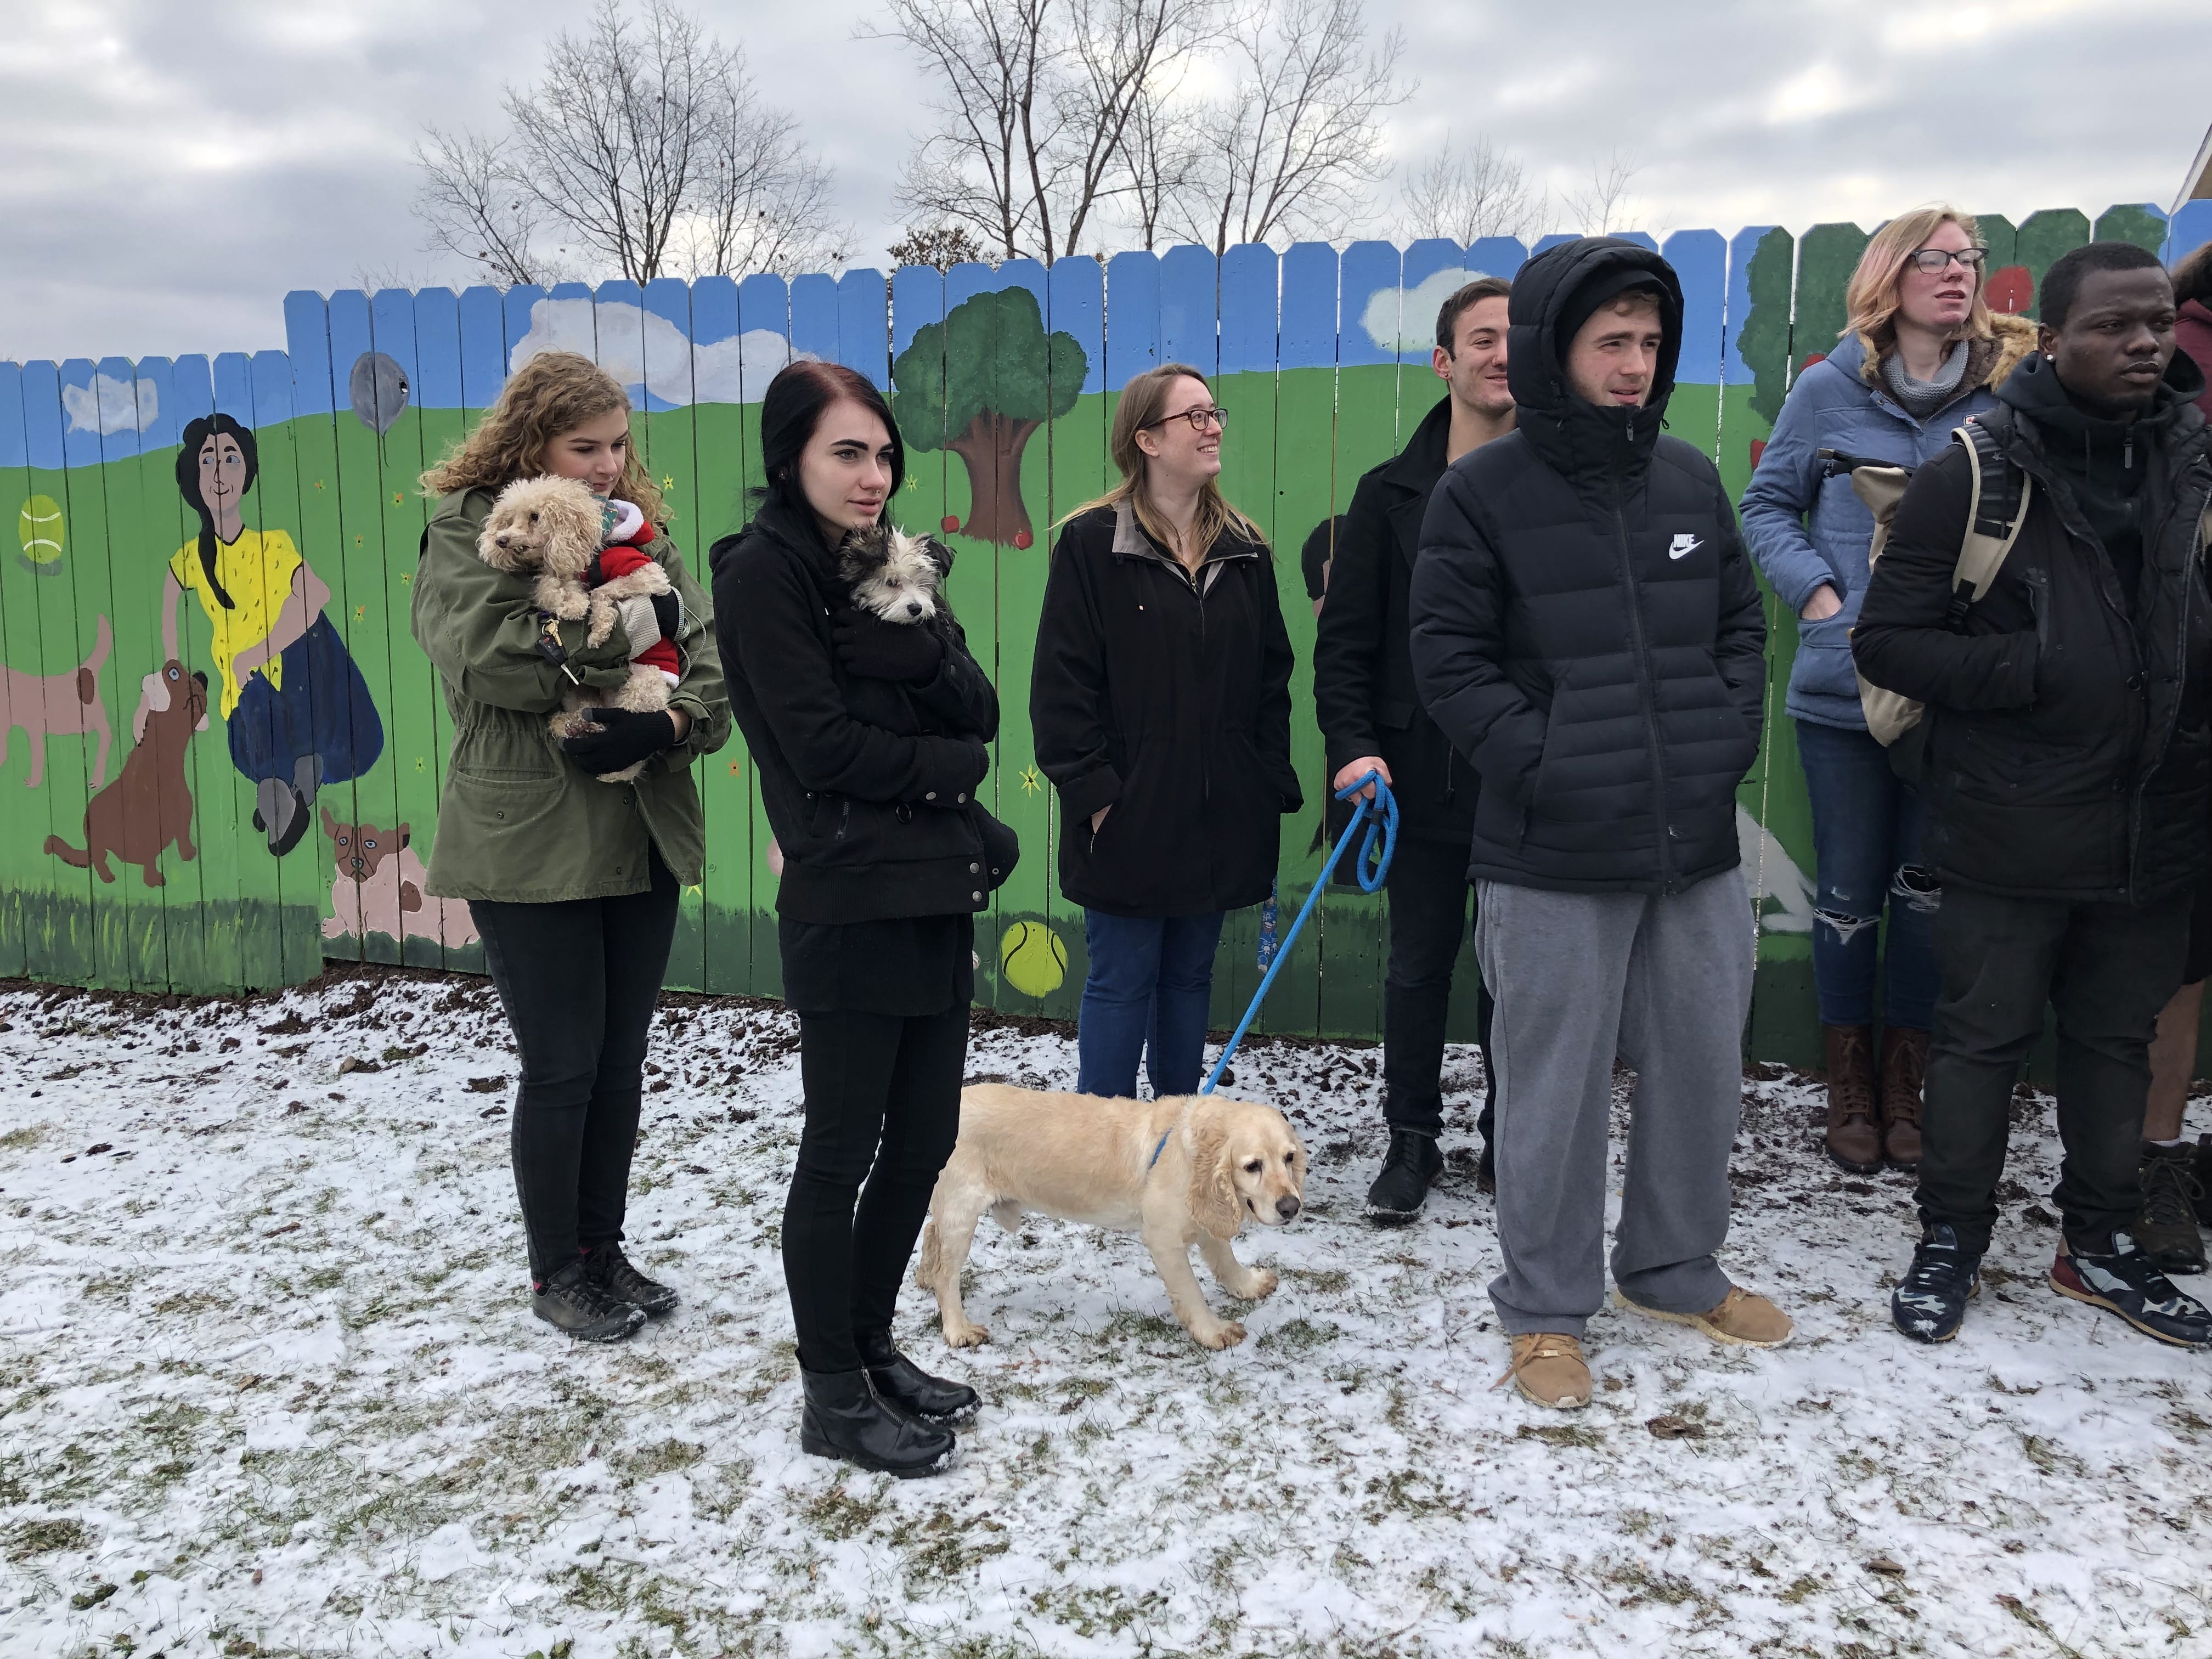 Making their mark: SUNY Broome art students beautify the Broome County Dog Shelter